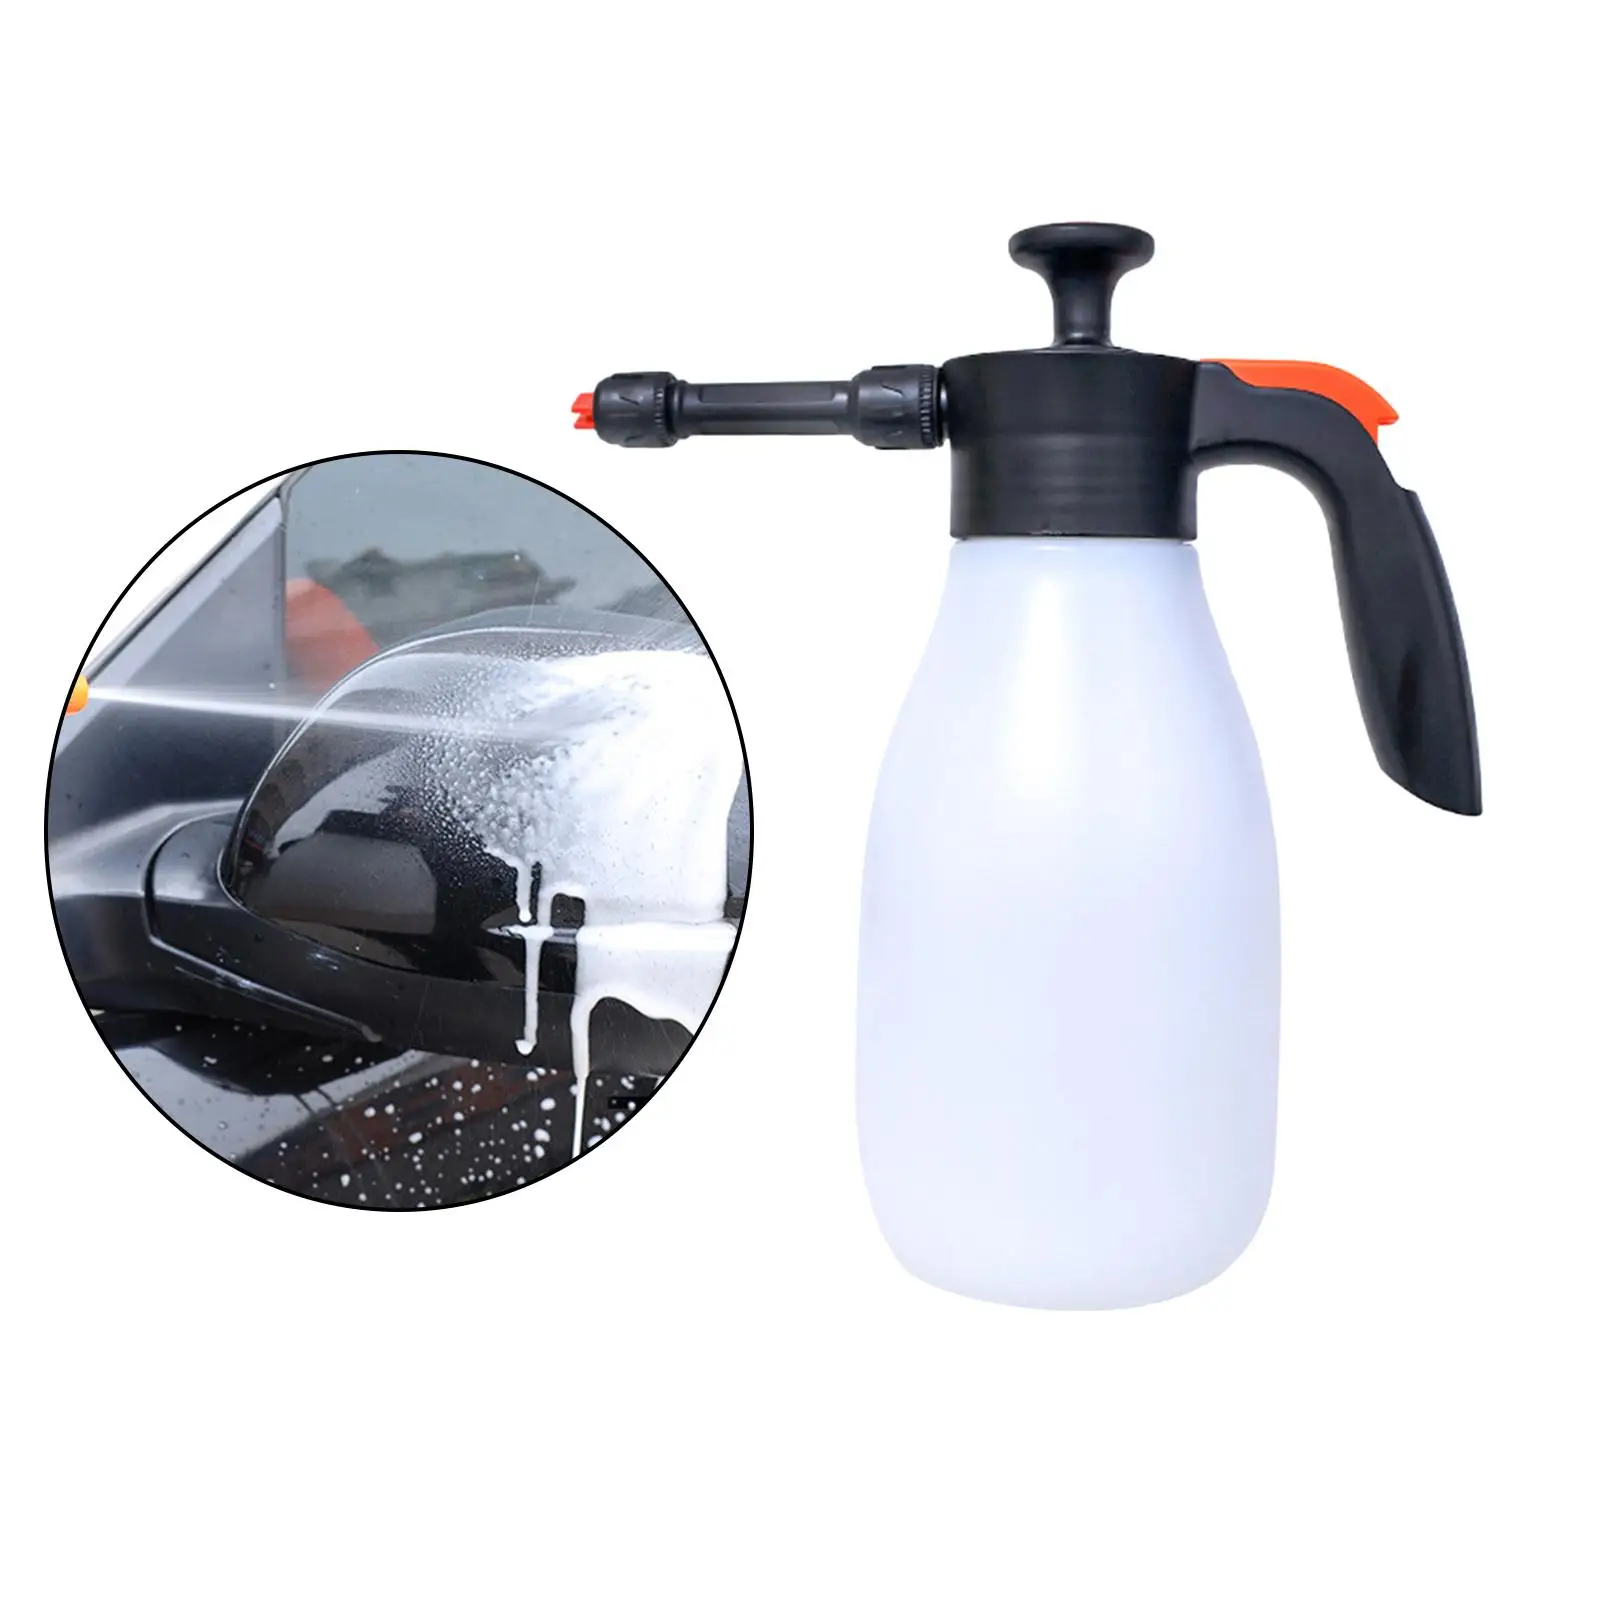 Foam Watering Can High Pressure Washer Spray Nozzle Fit for Car Washing Pets Showering